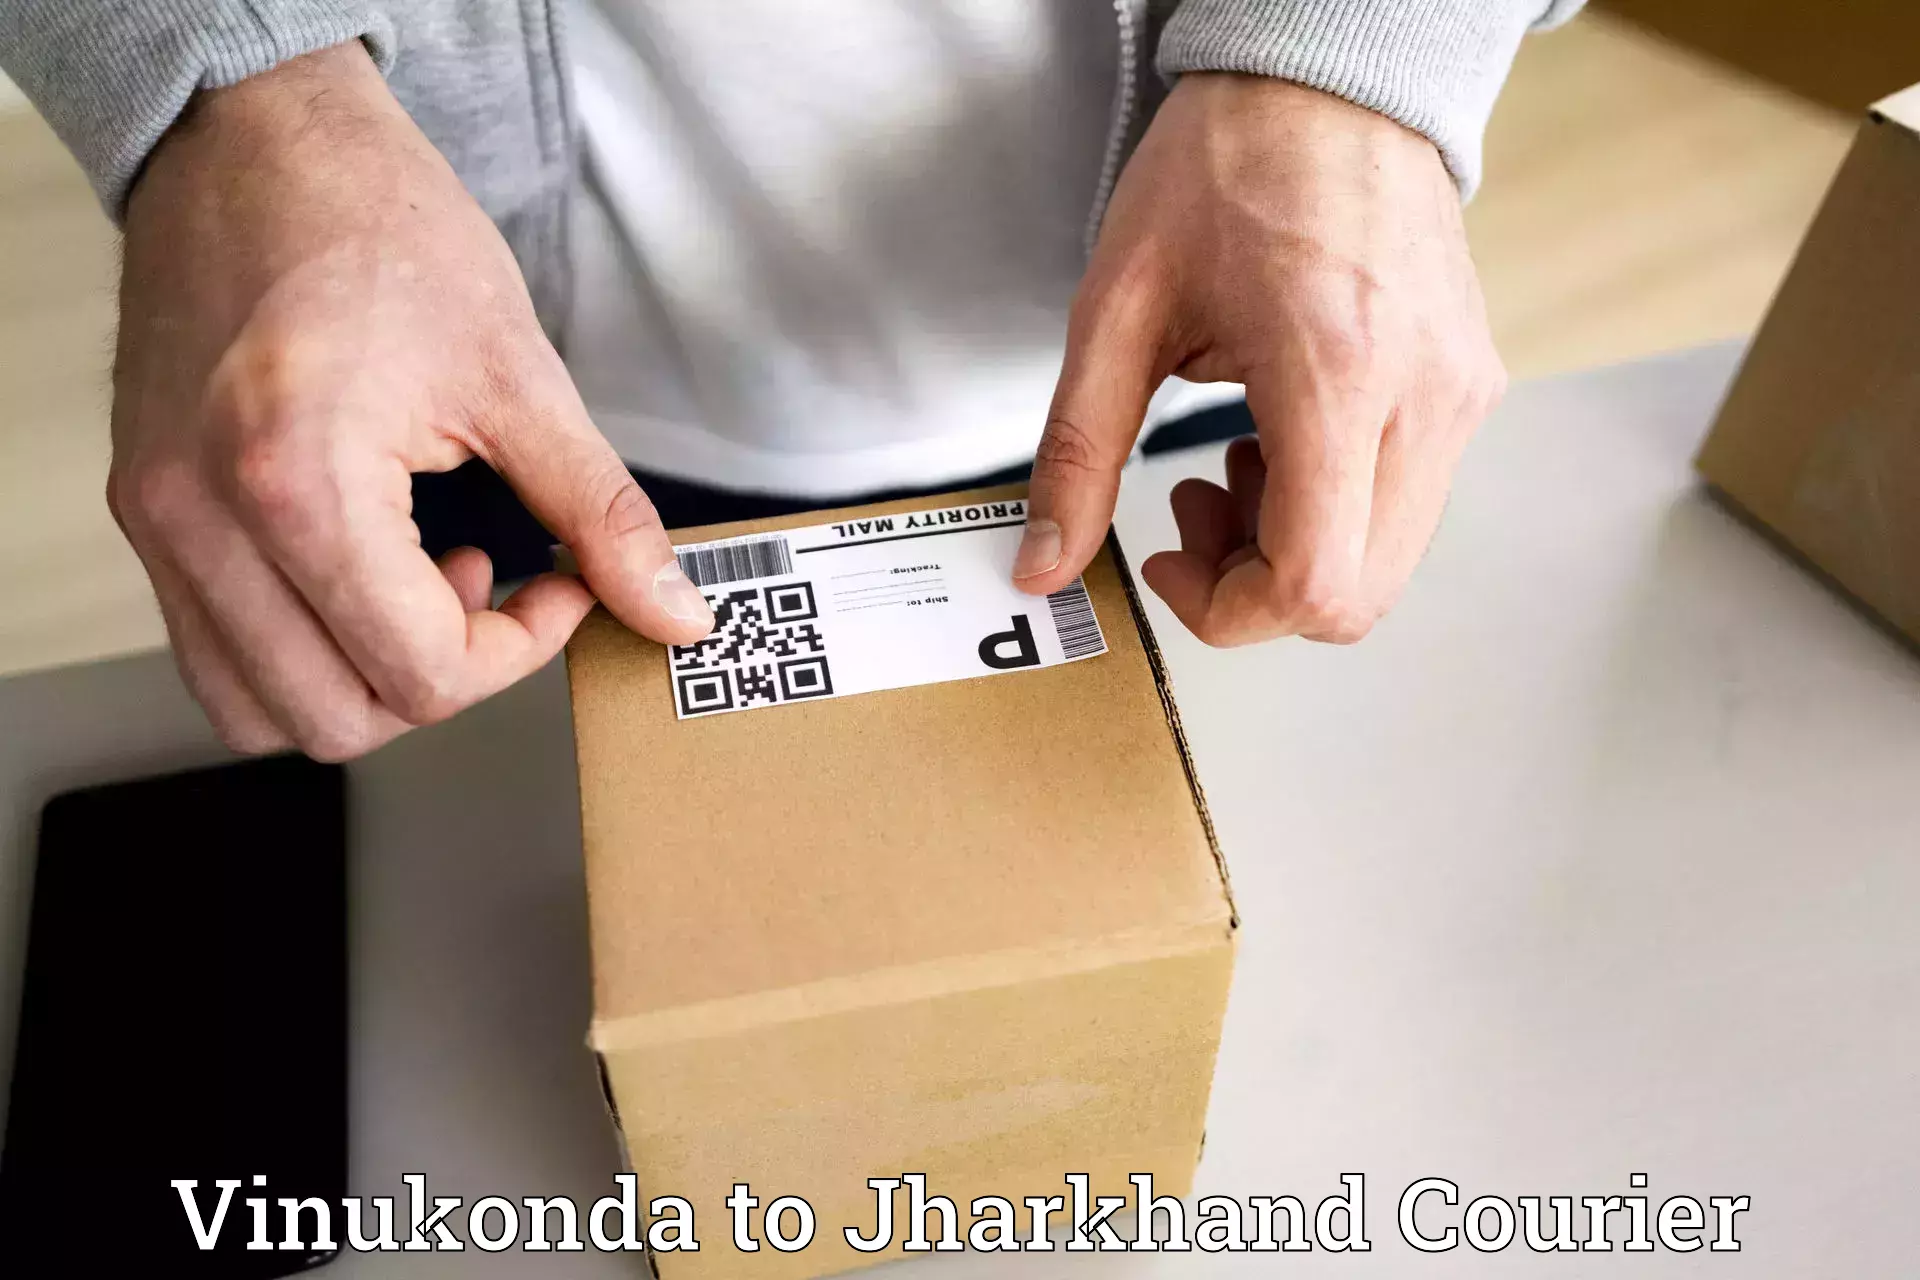 Reliable delivery network Vinukonda to Dhanbad